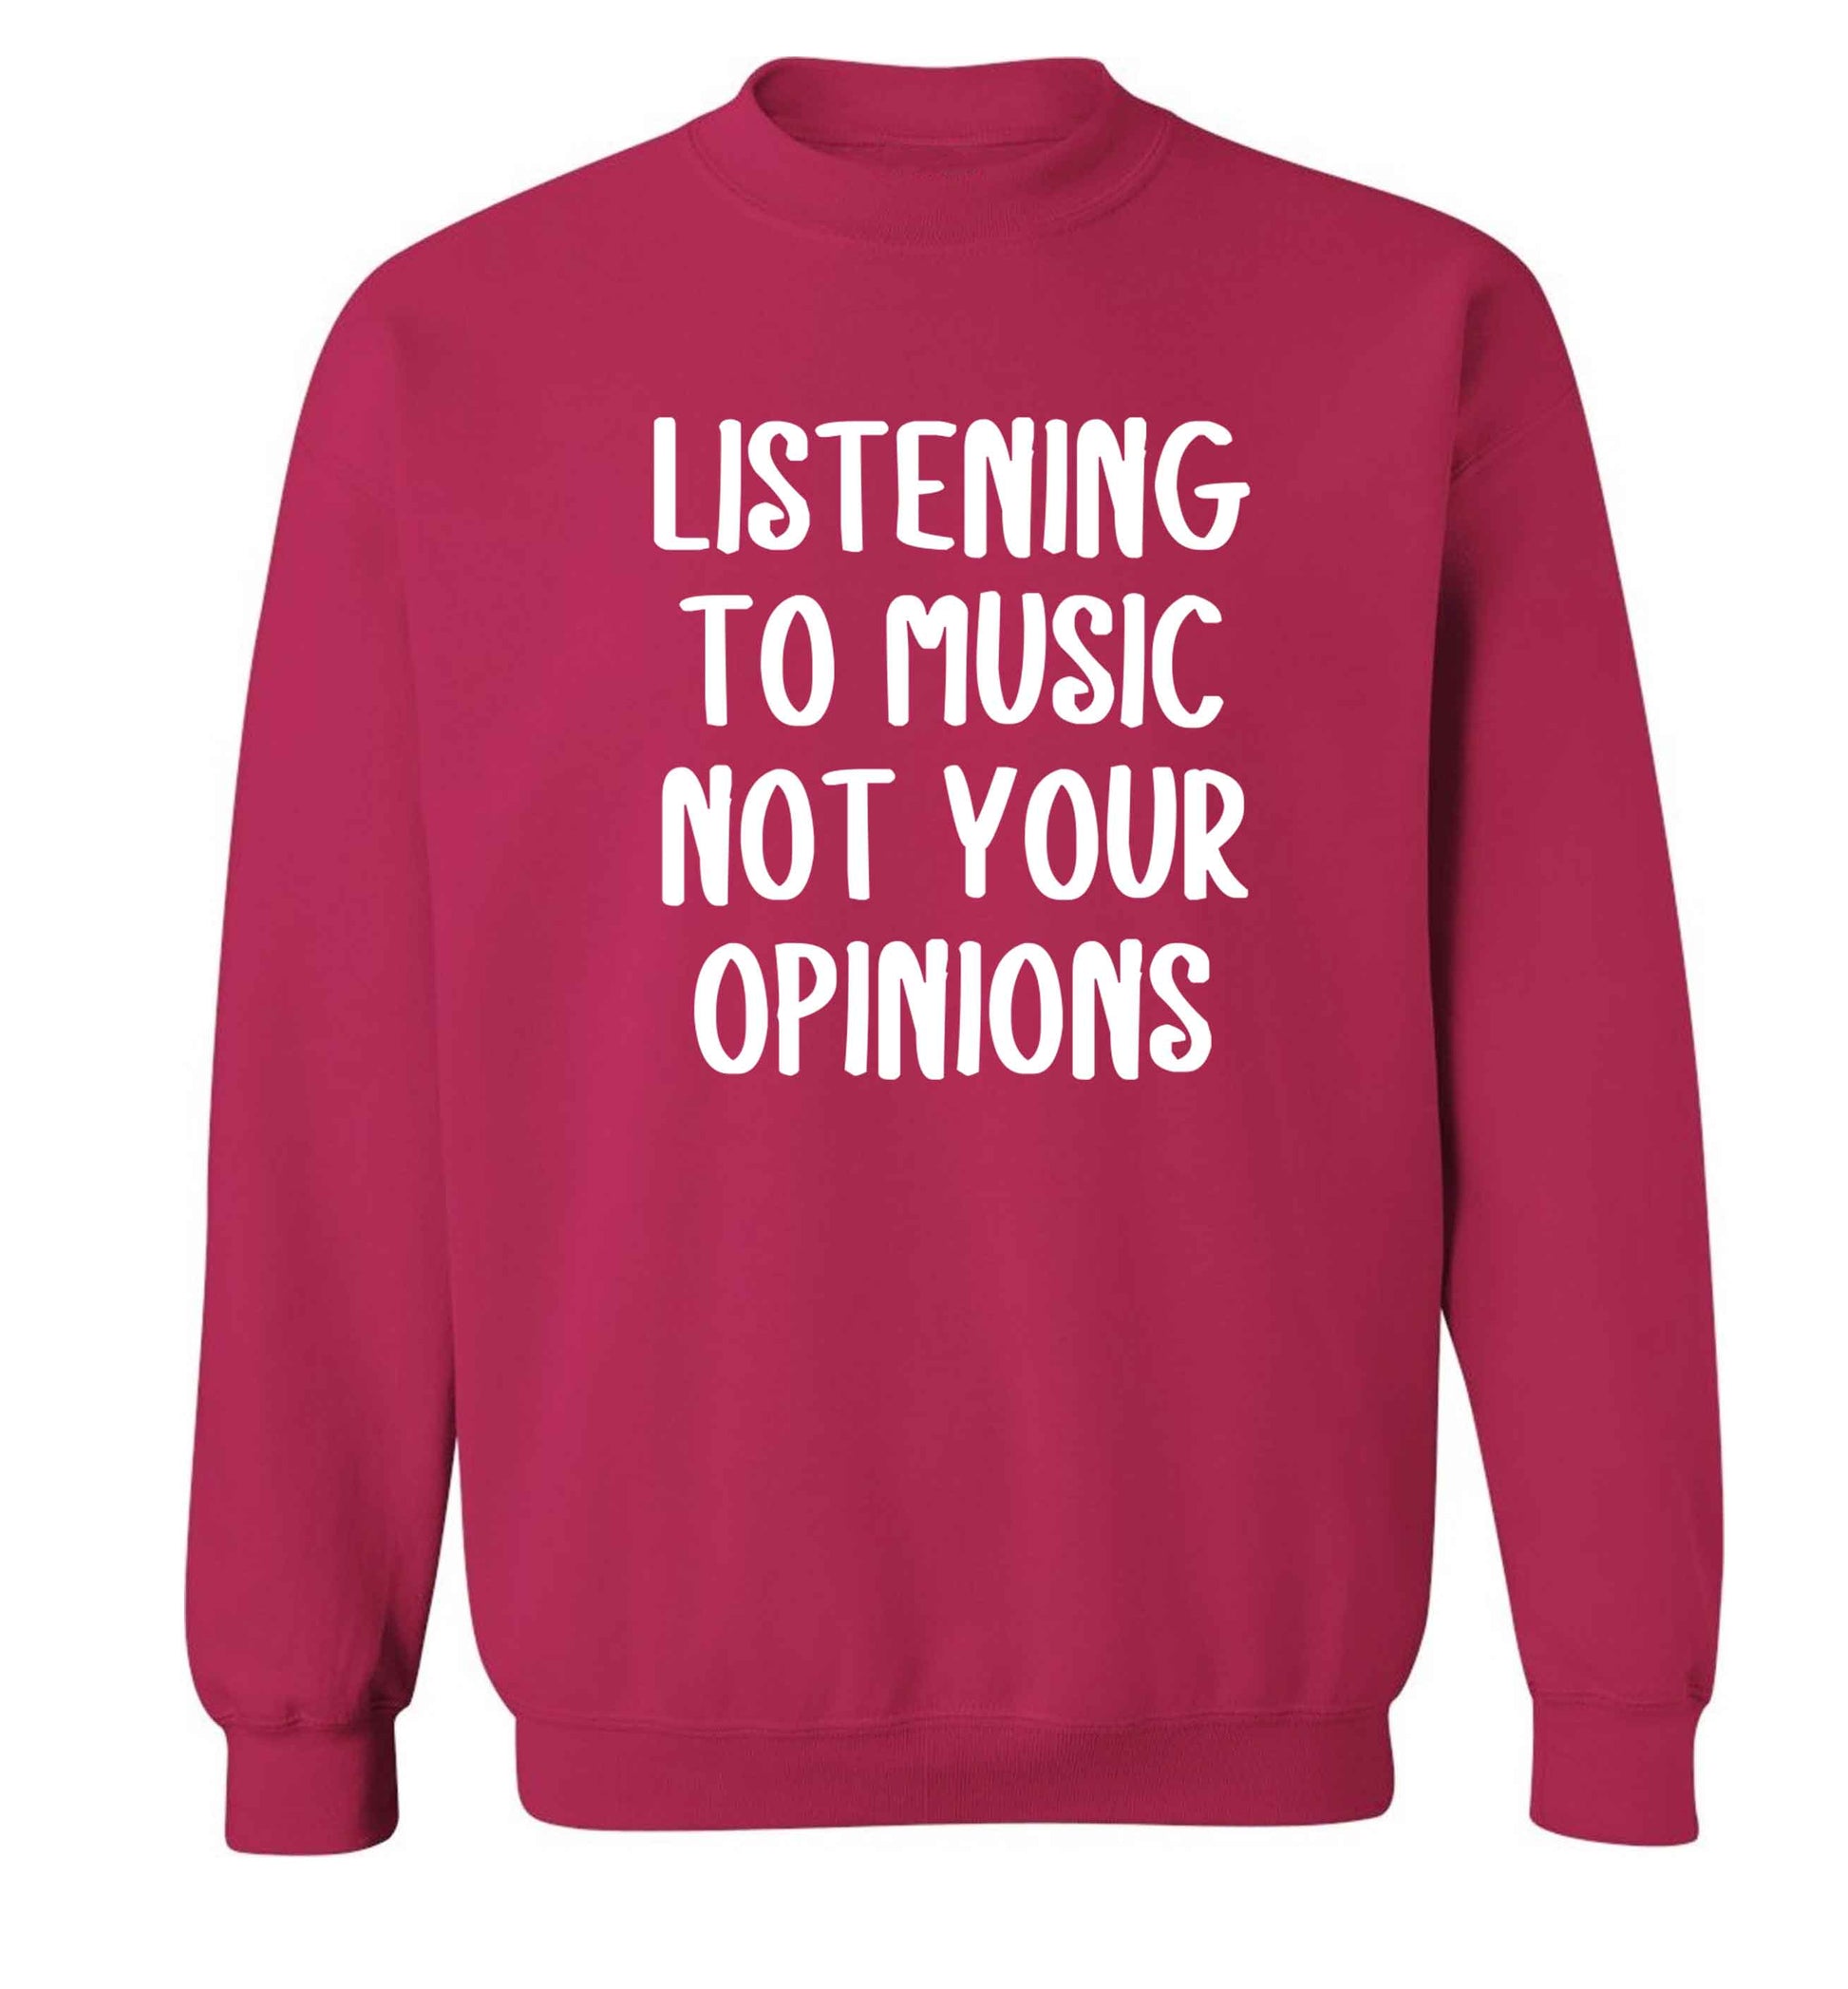 Listening to music not your opinions adult's unisex pink sweater 2XL